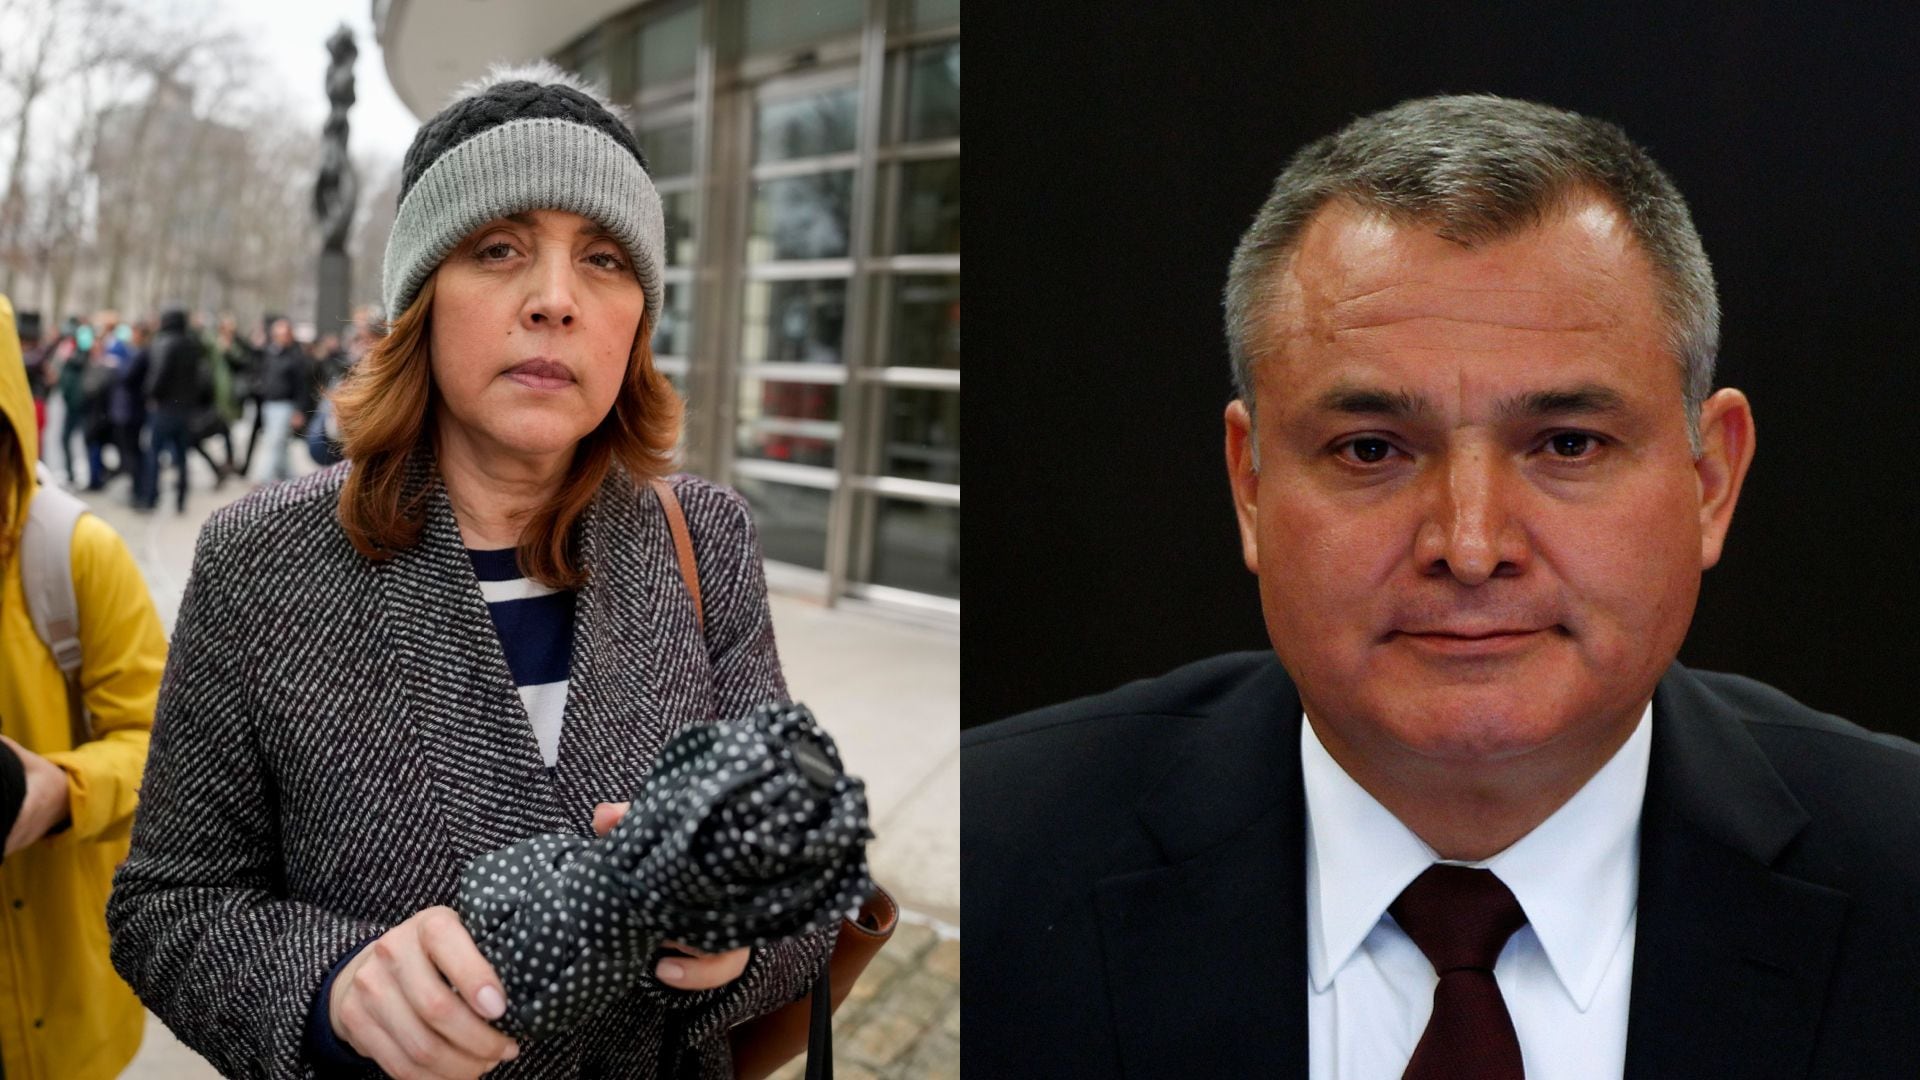 Linda Cristina Pereyra Gálvez, wife of the former Secretary of Public Security, is also mentioned in the statement (Photo: AP/John Minchillo/Special)